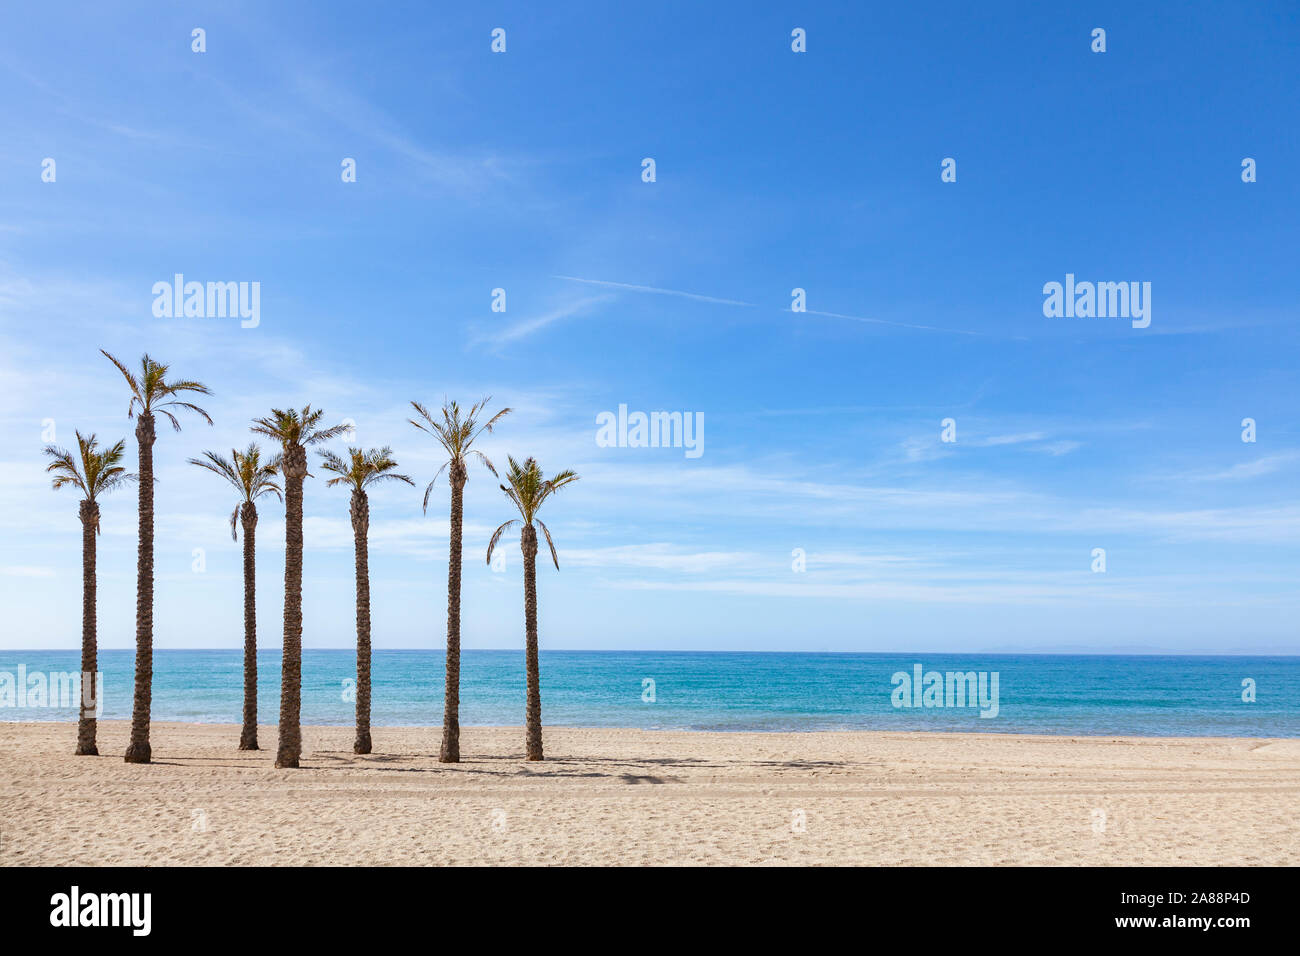 Set of palm trees located in a solitary beach and a blue sky Stock Photo